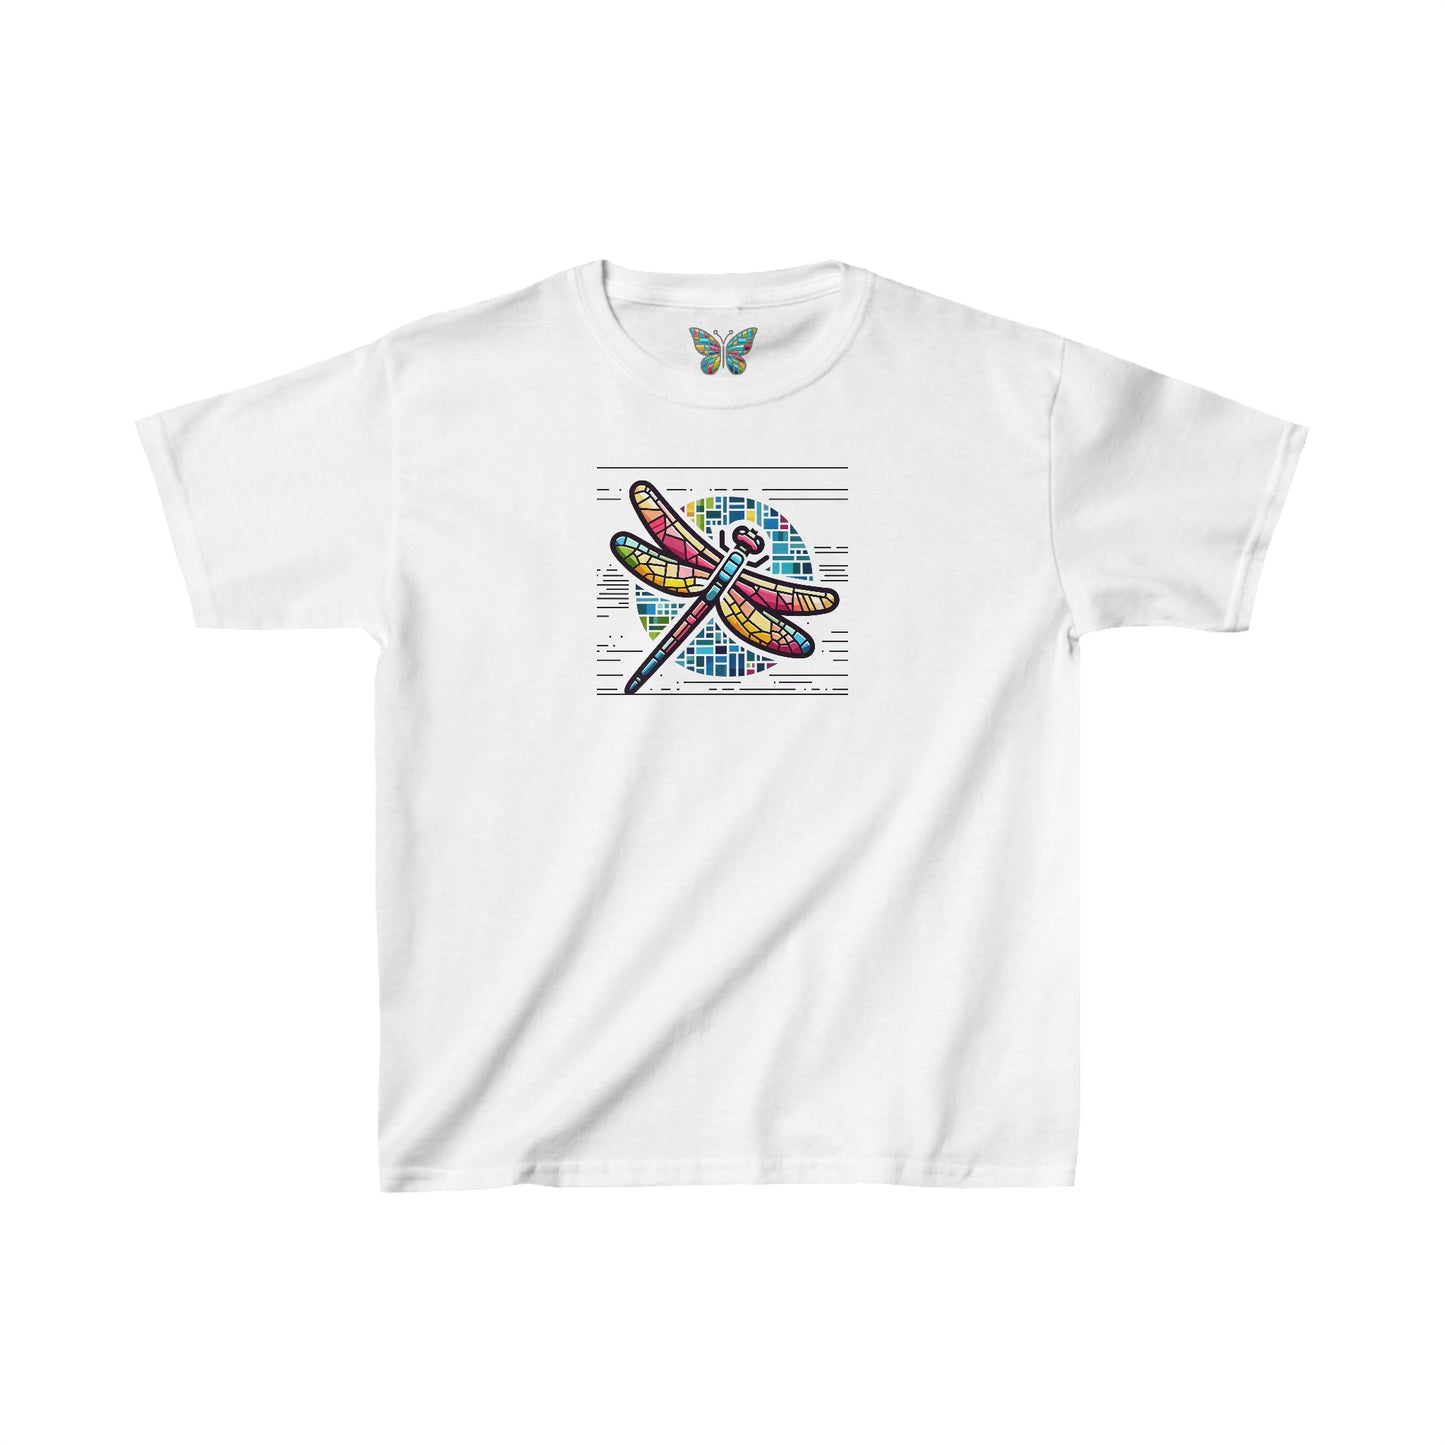 Dragonfly Dazzloresque - Youth - Snazzle Tee